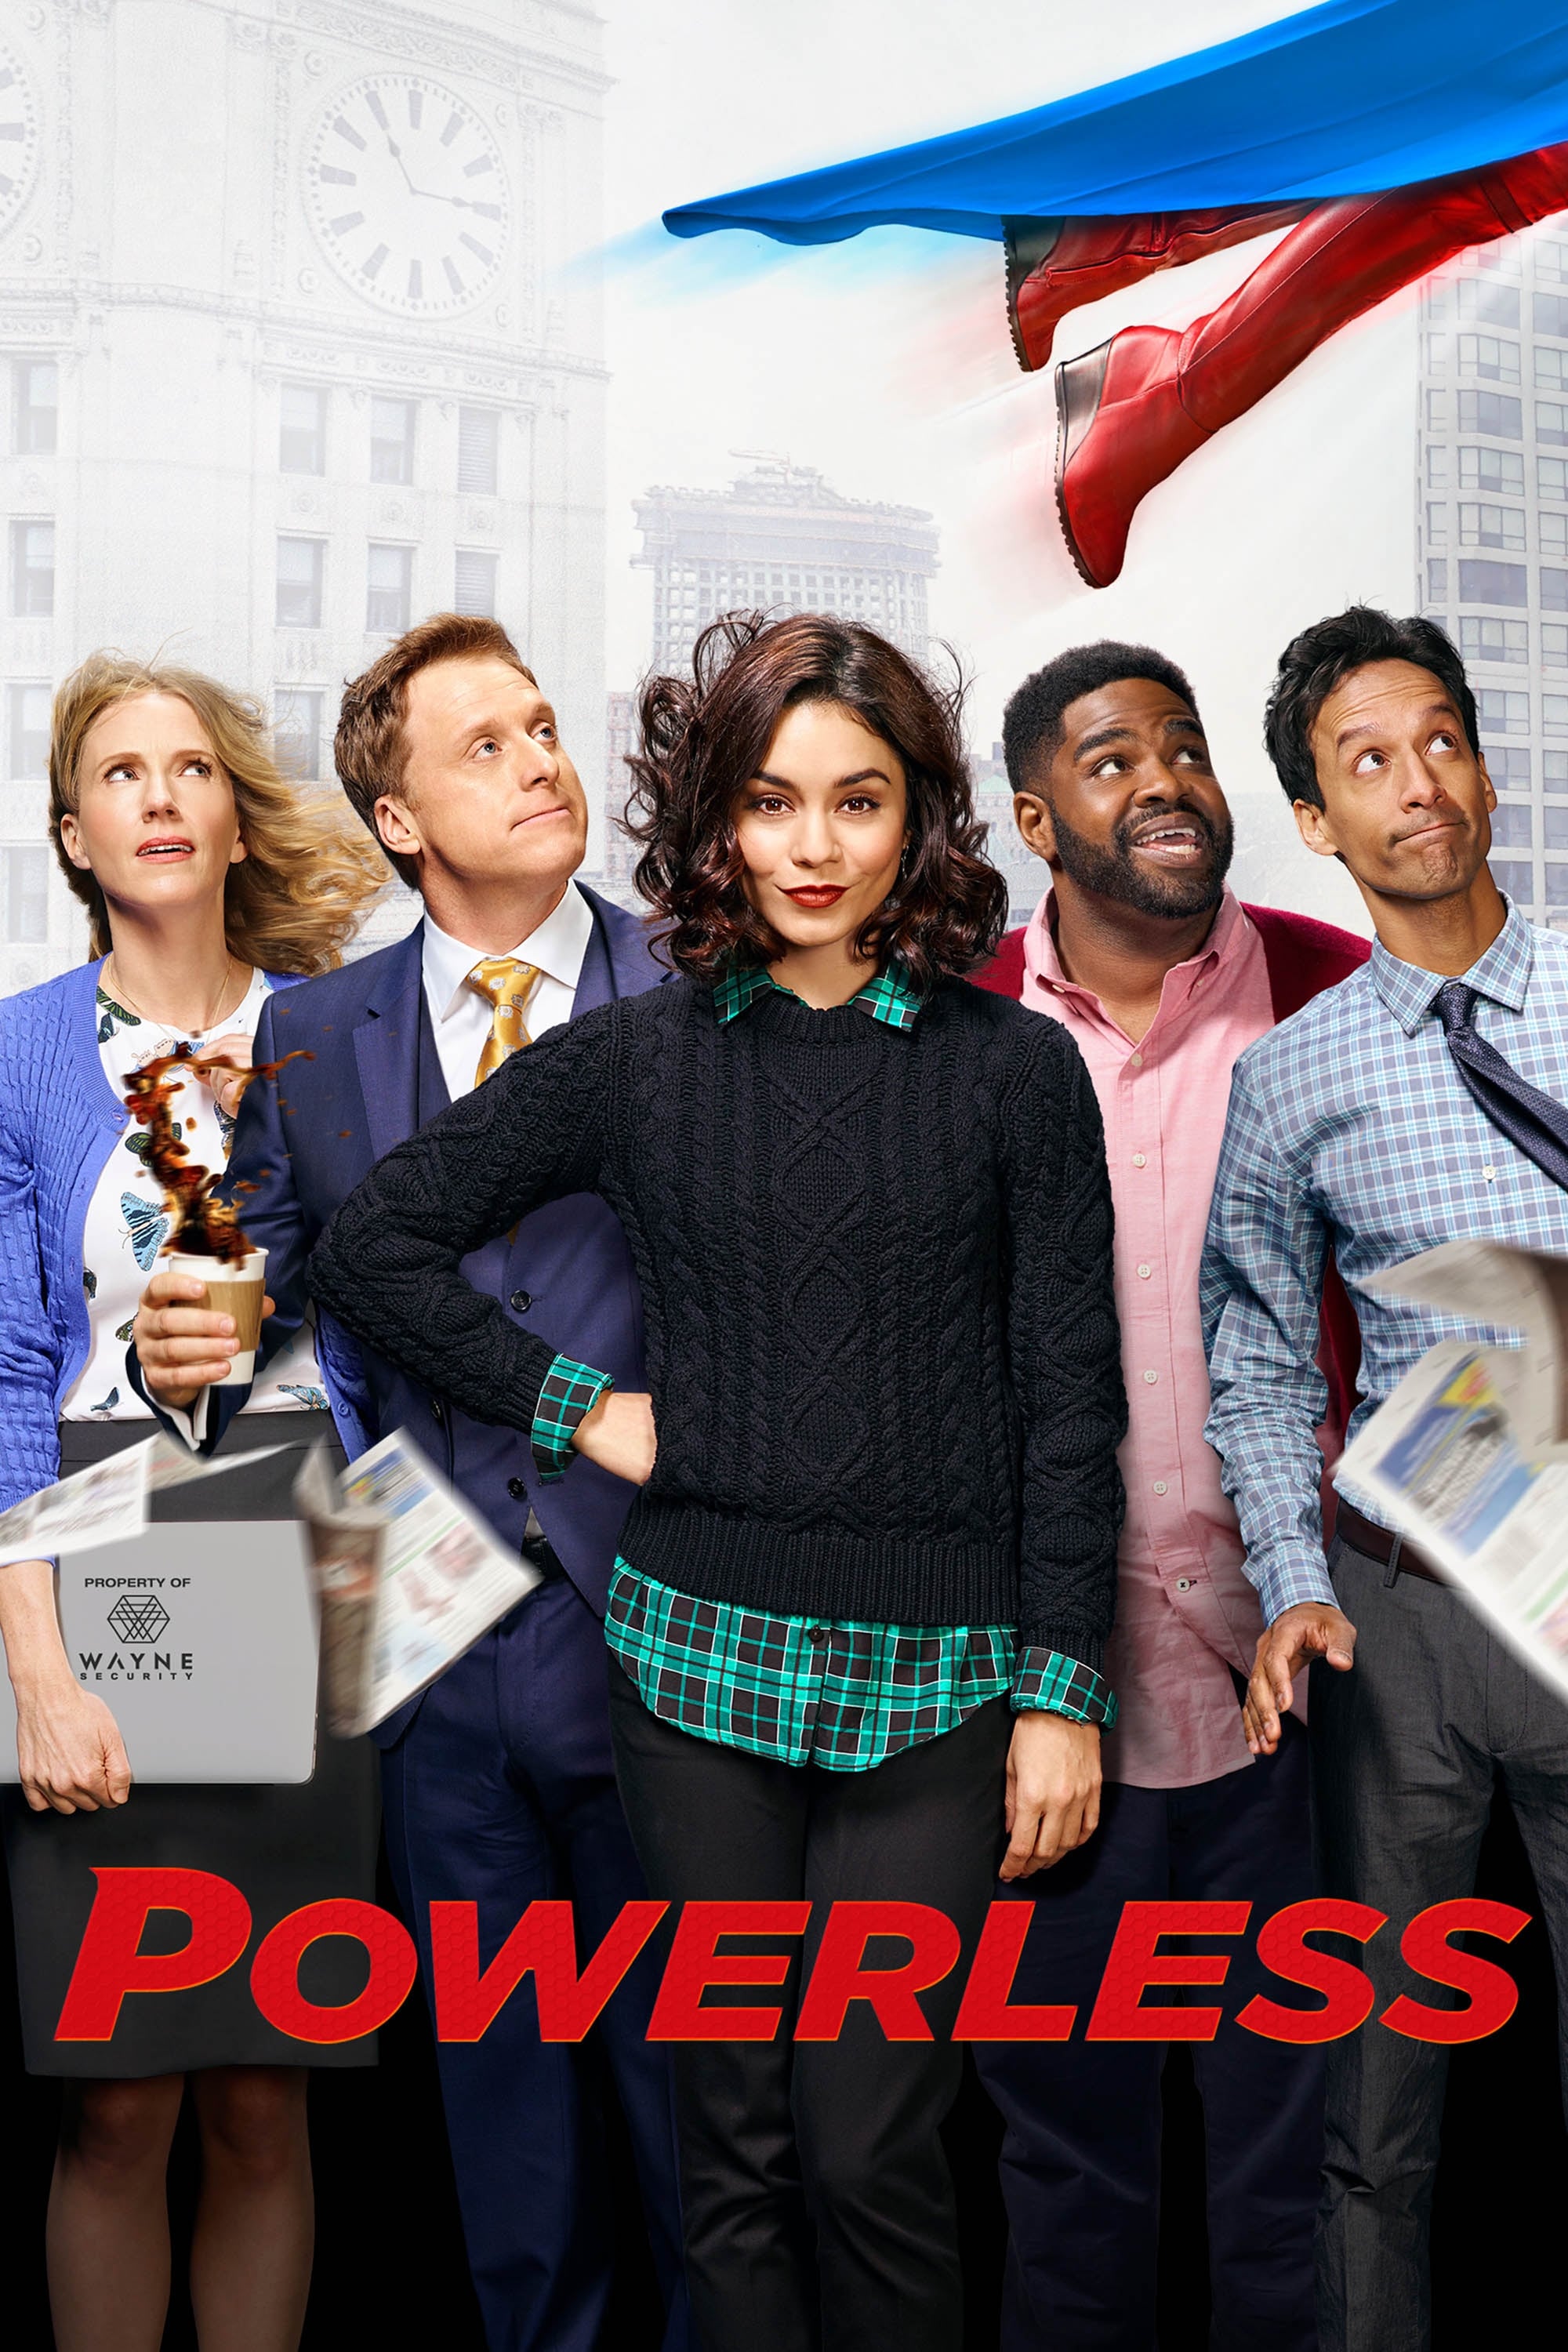 Powerless TV Shows About Workplace Comedy